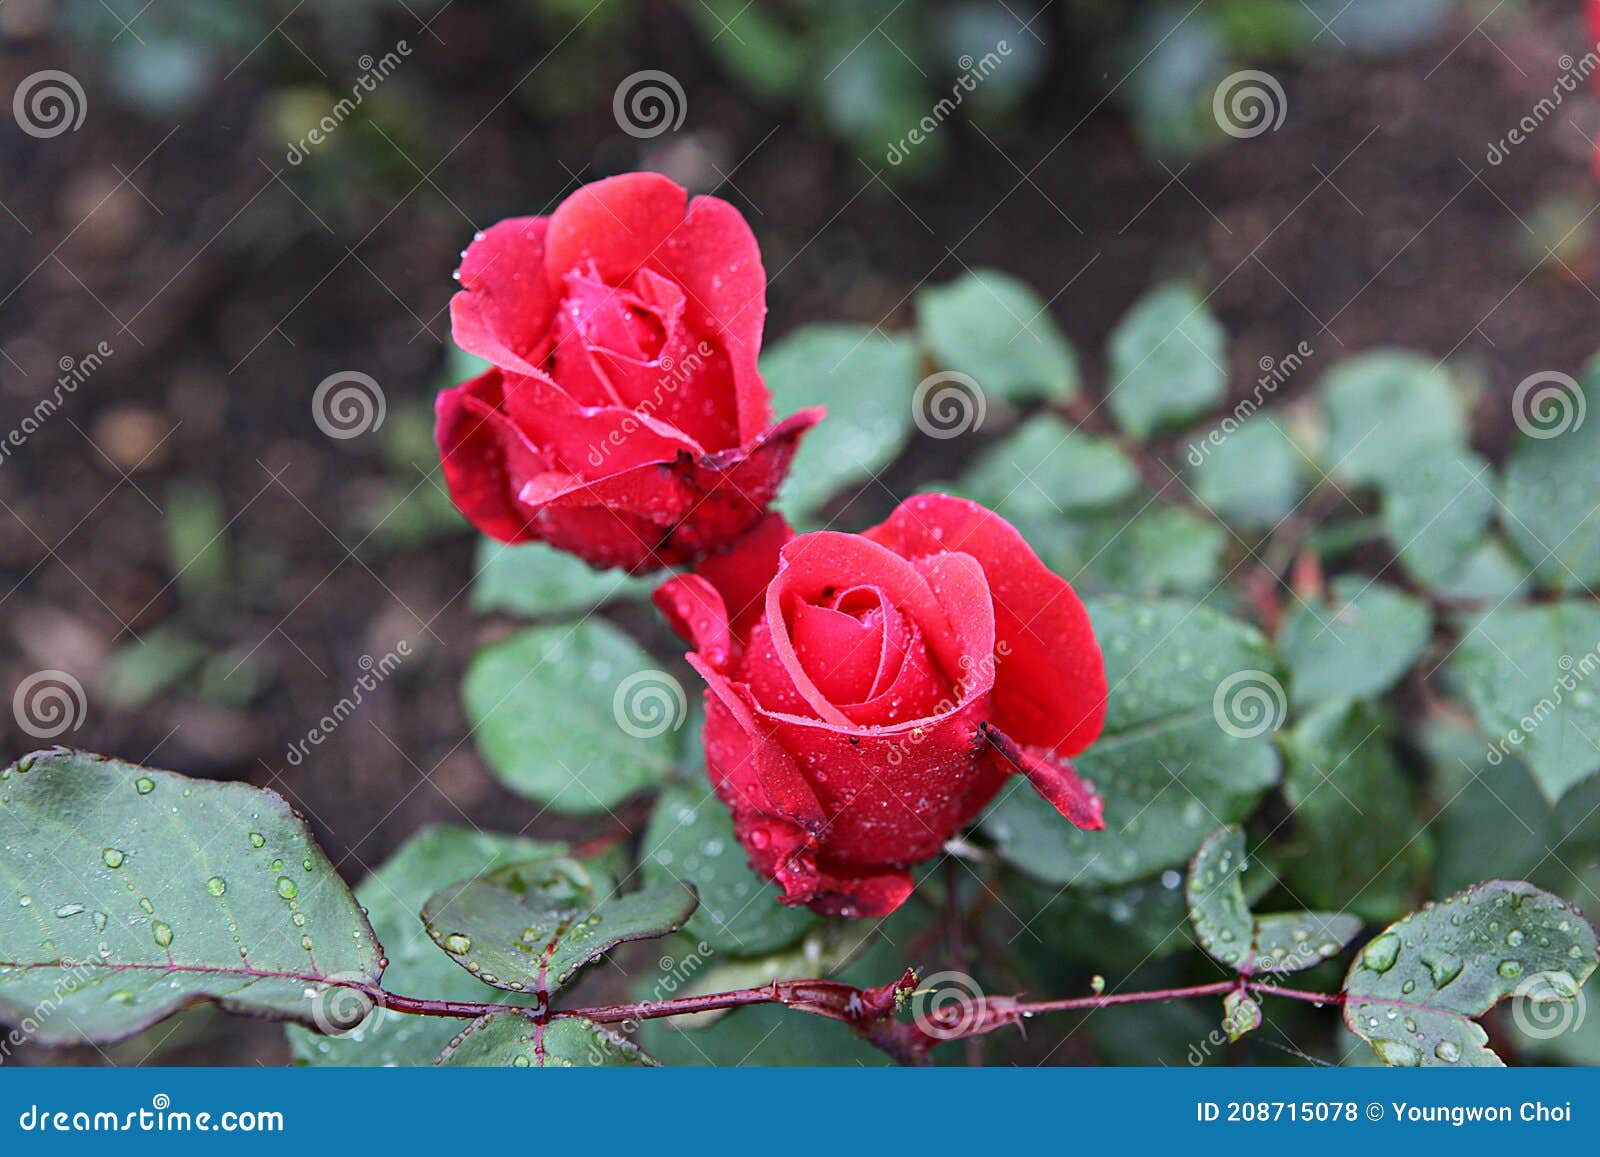 Roses in the park stock photo. Image of peony, petal - 208715078